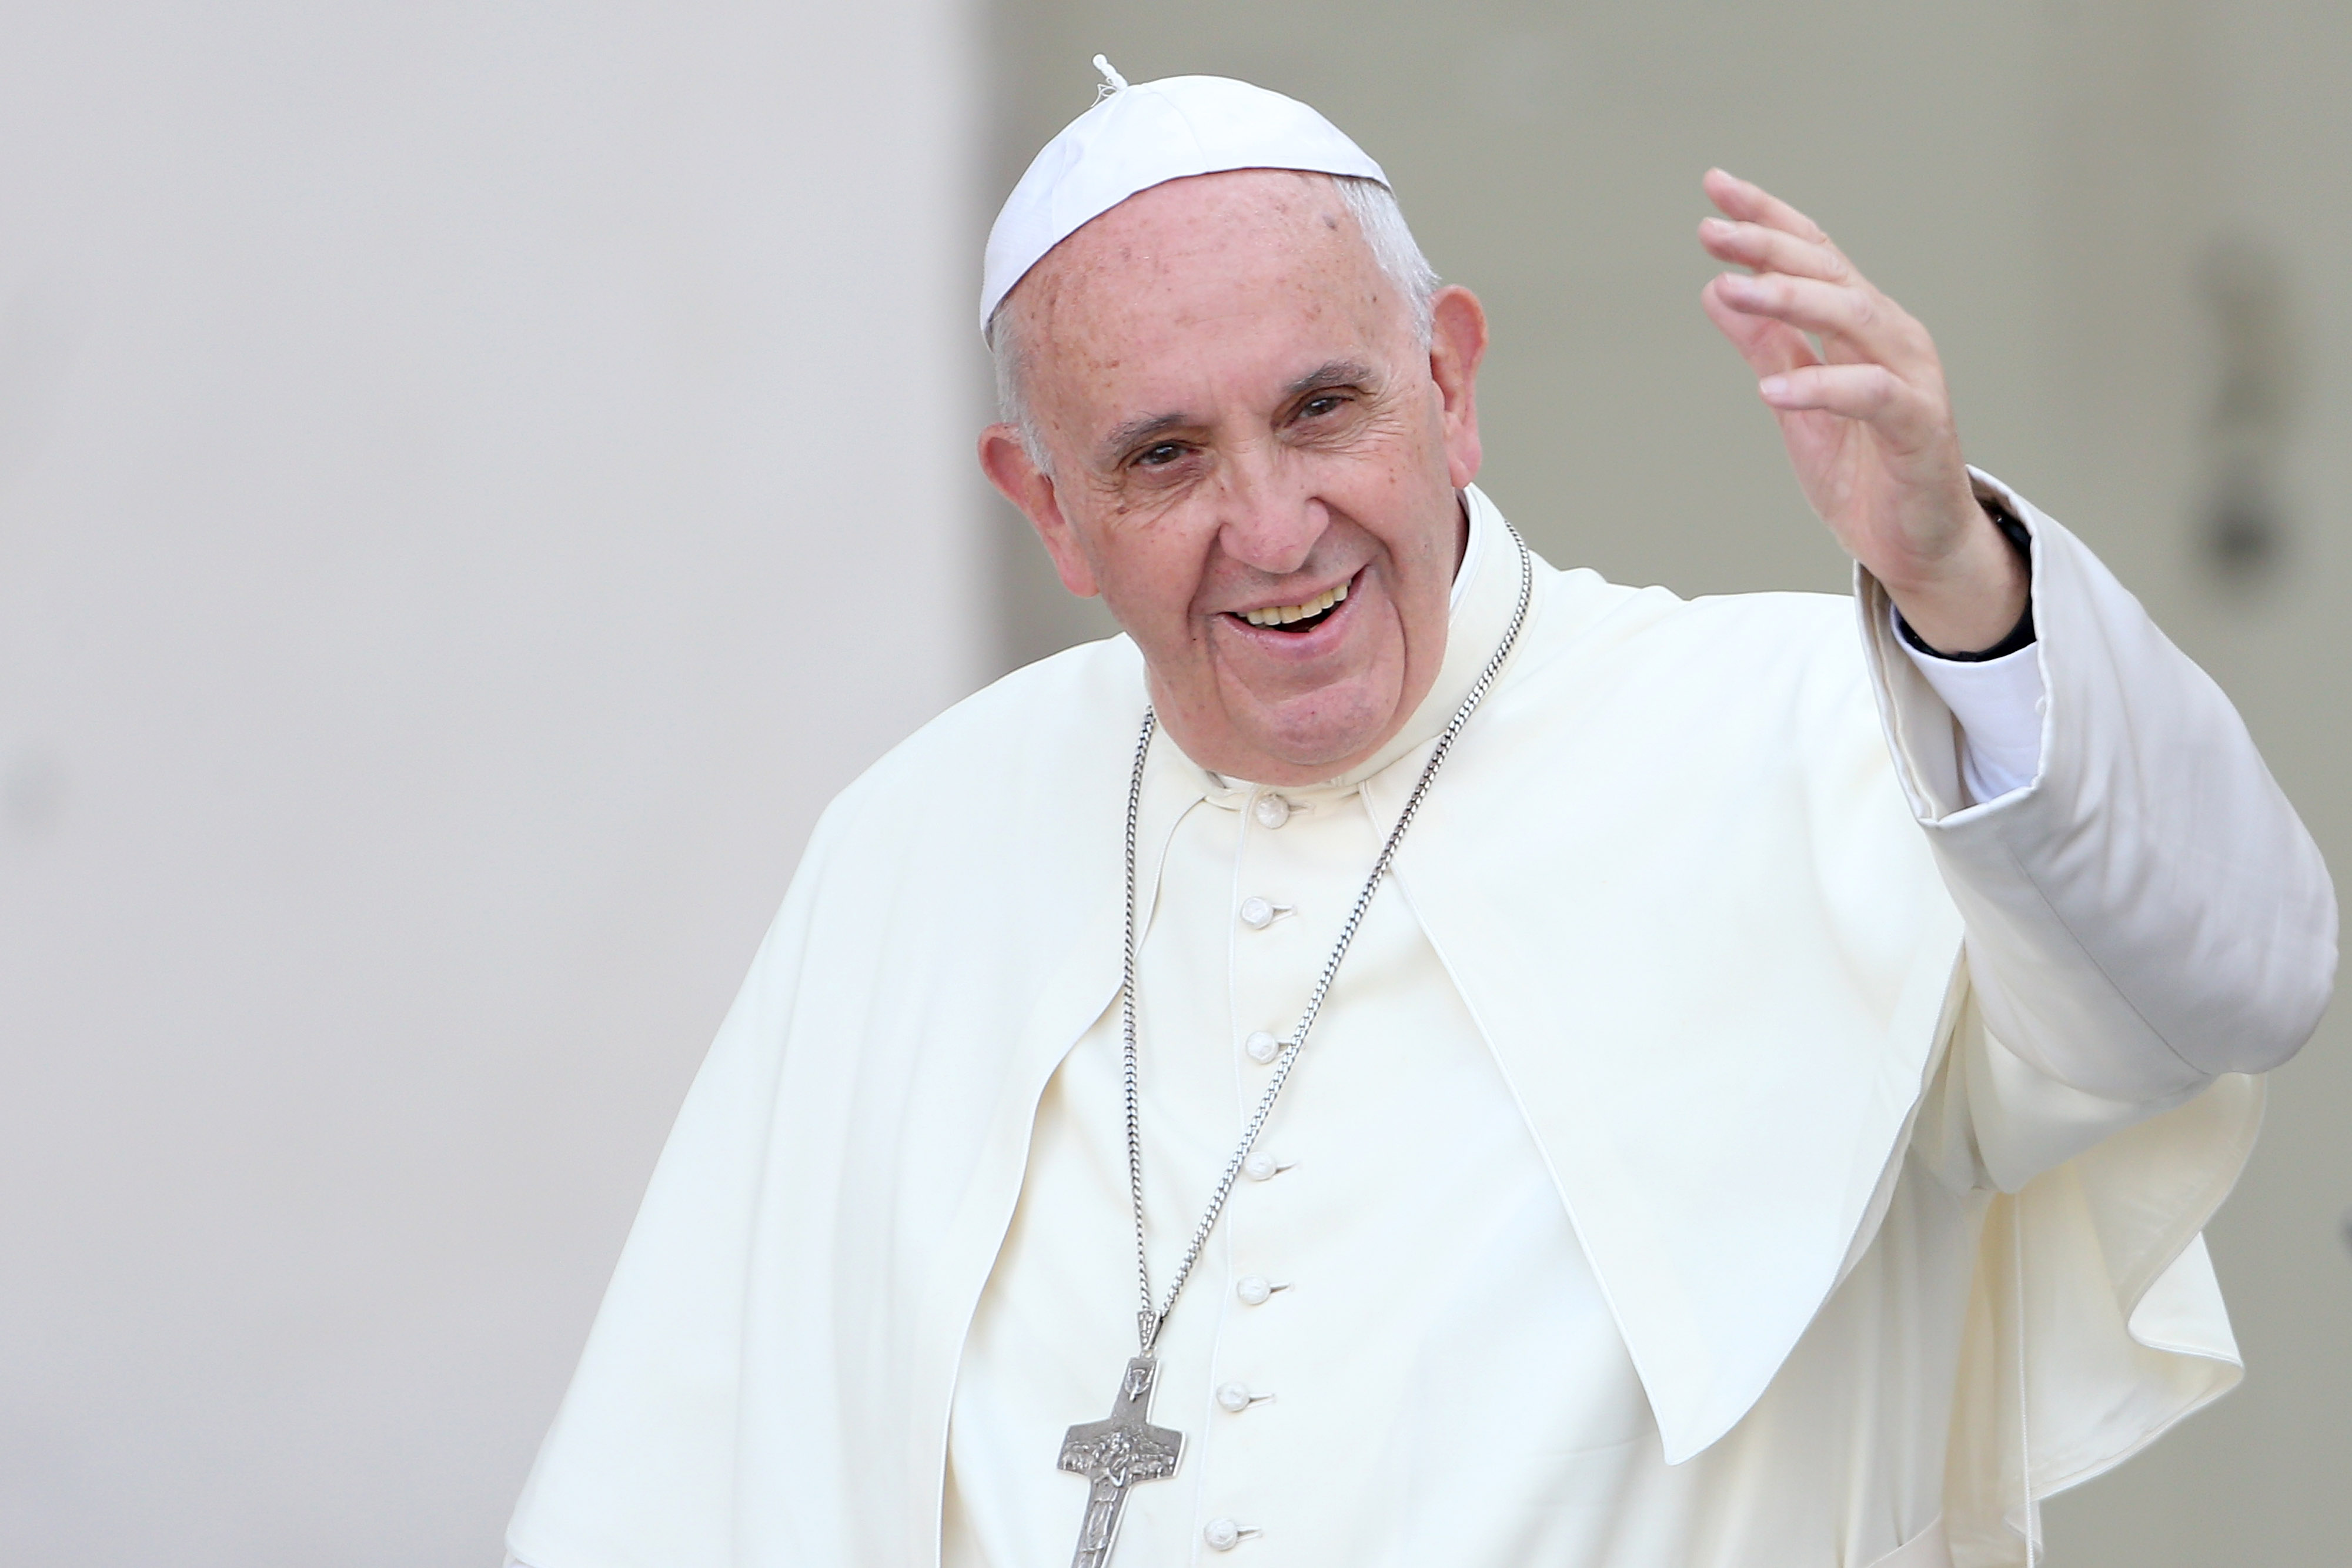 Pope Francis waves to the faithful as he arrives in St. Peter's Square for a meeting with the Roman Diocesans on June 14, 2015 in Vatican City. (Franco Origlia—Getty Images)